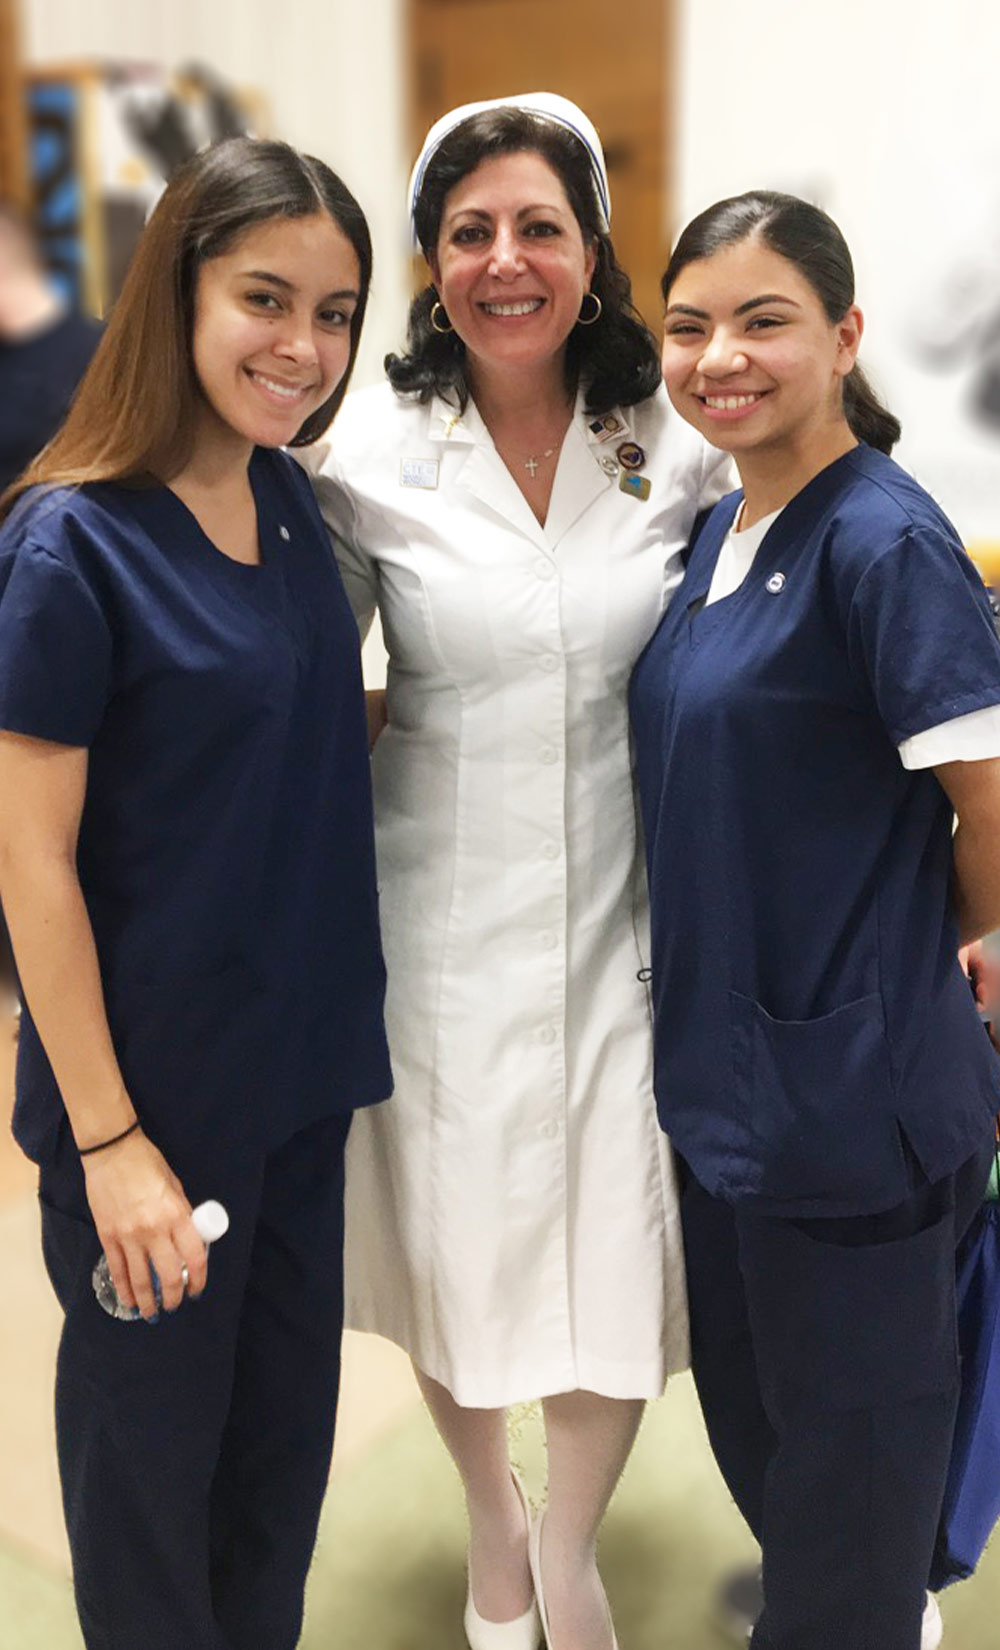 Linda Romano, center, pictured with two young women wearing dark blue scrubs